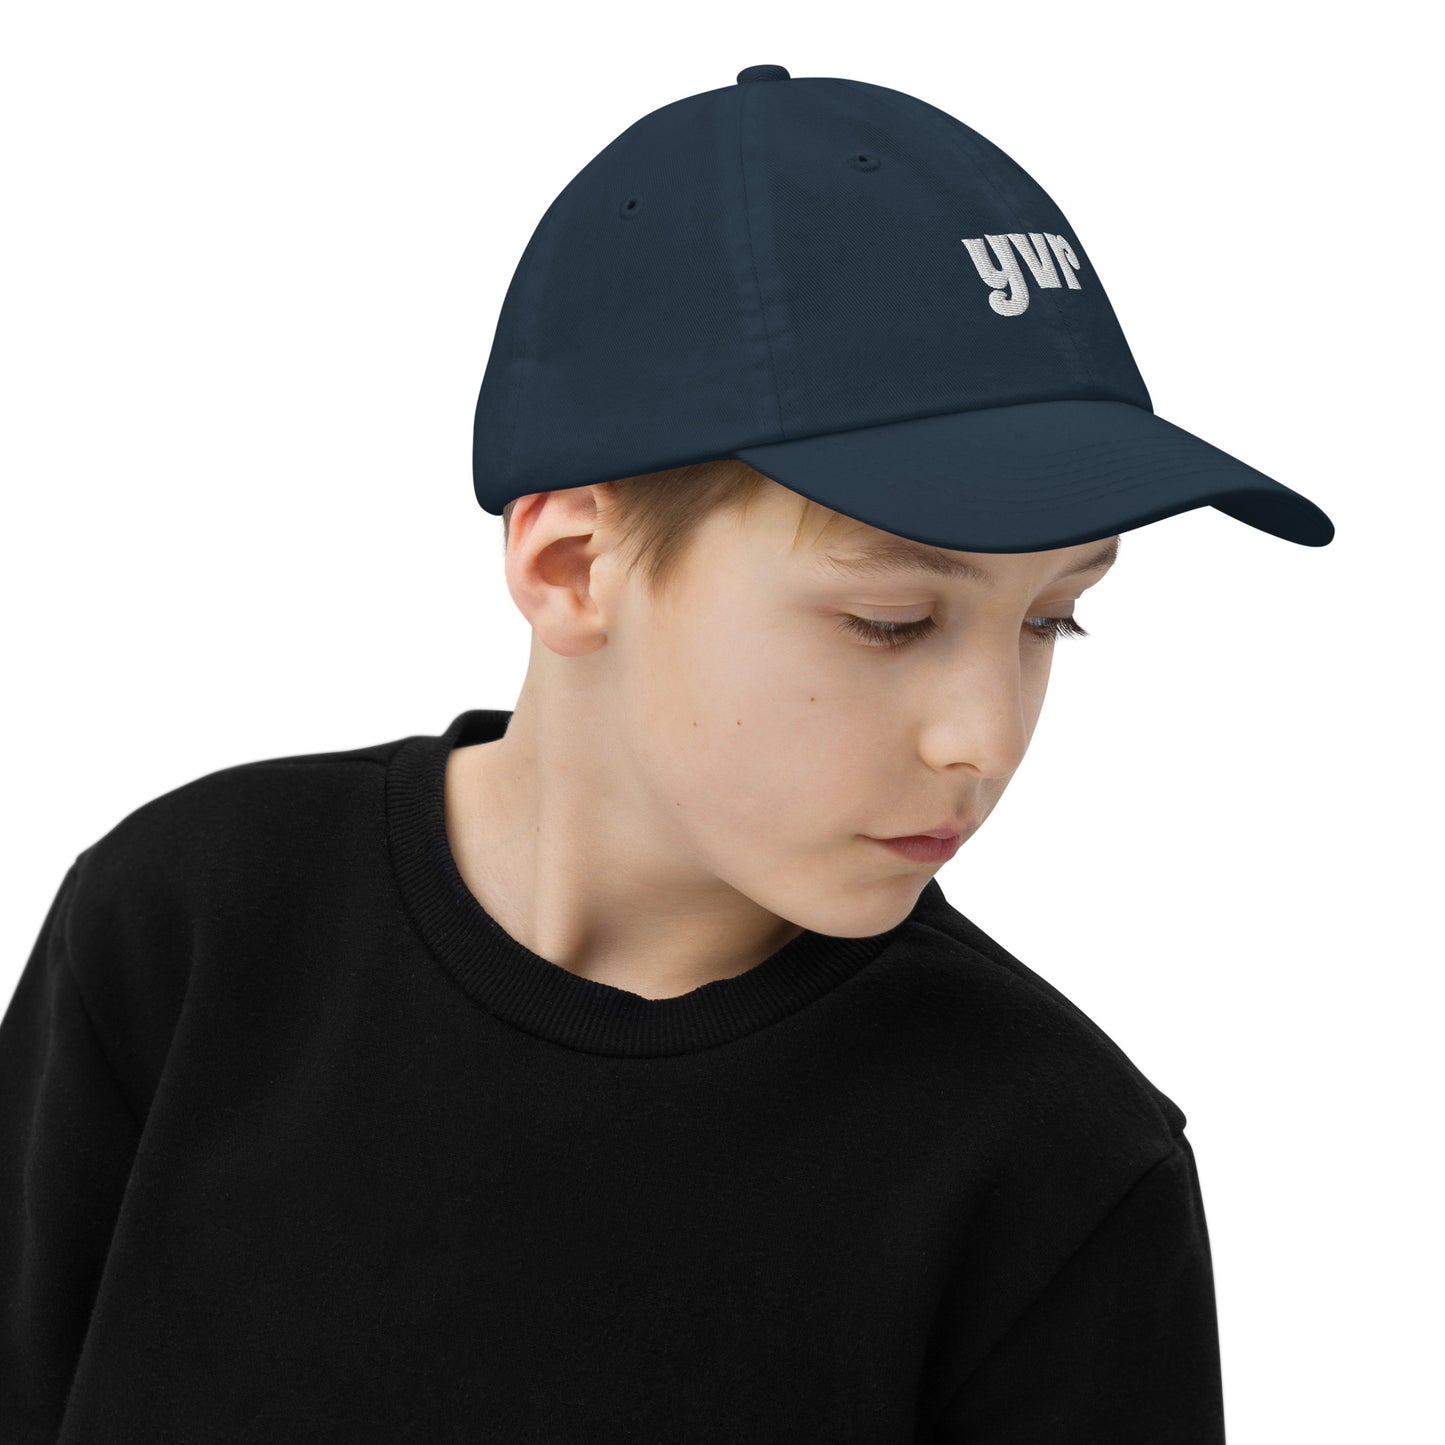 Groovy Kid's Baseball Cap - White • YVR Vancouver • YHM Designs - Image 04